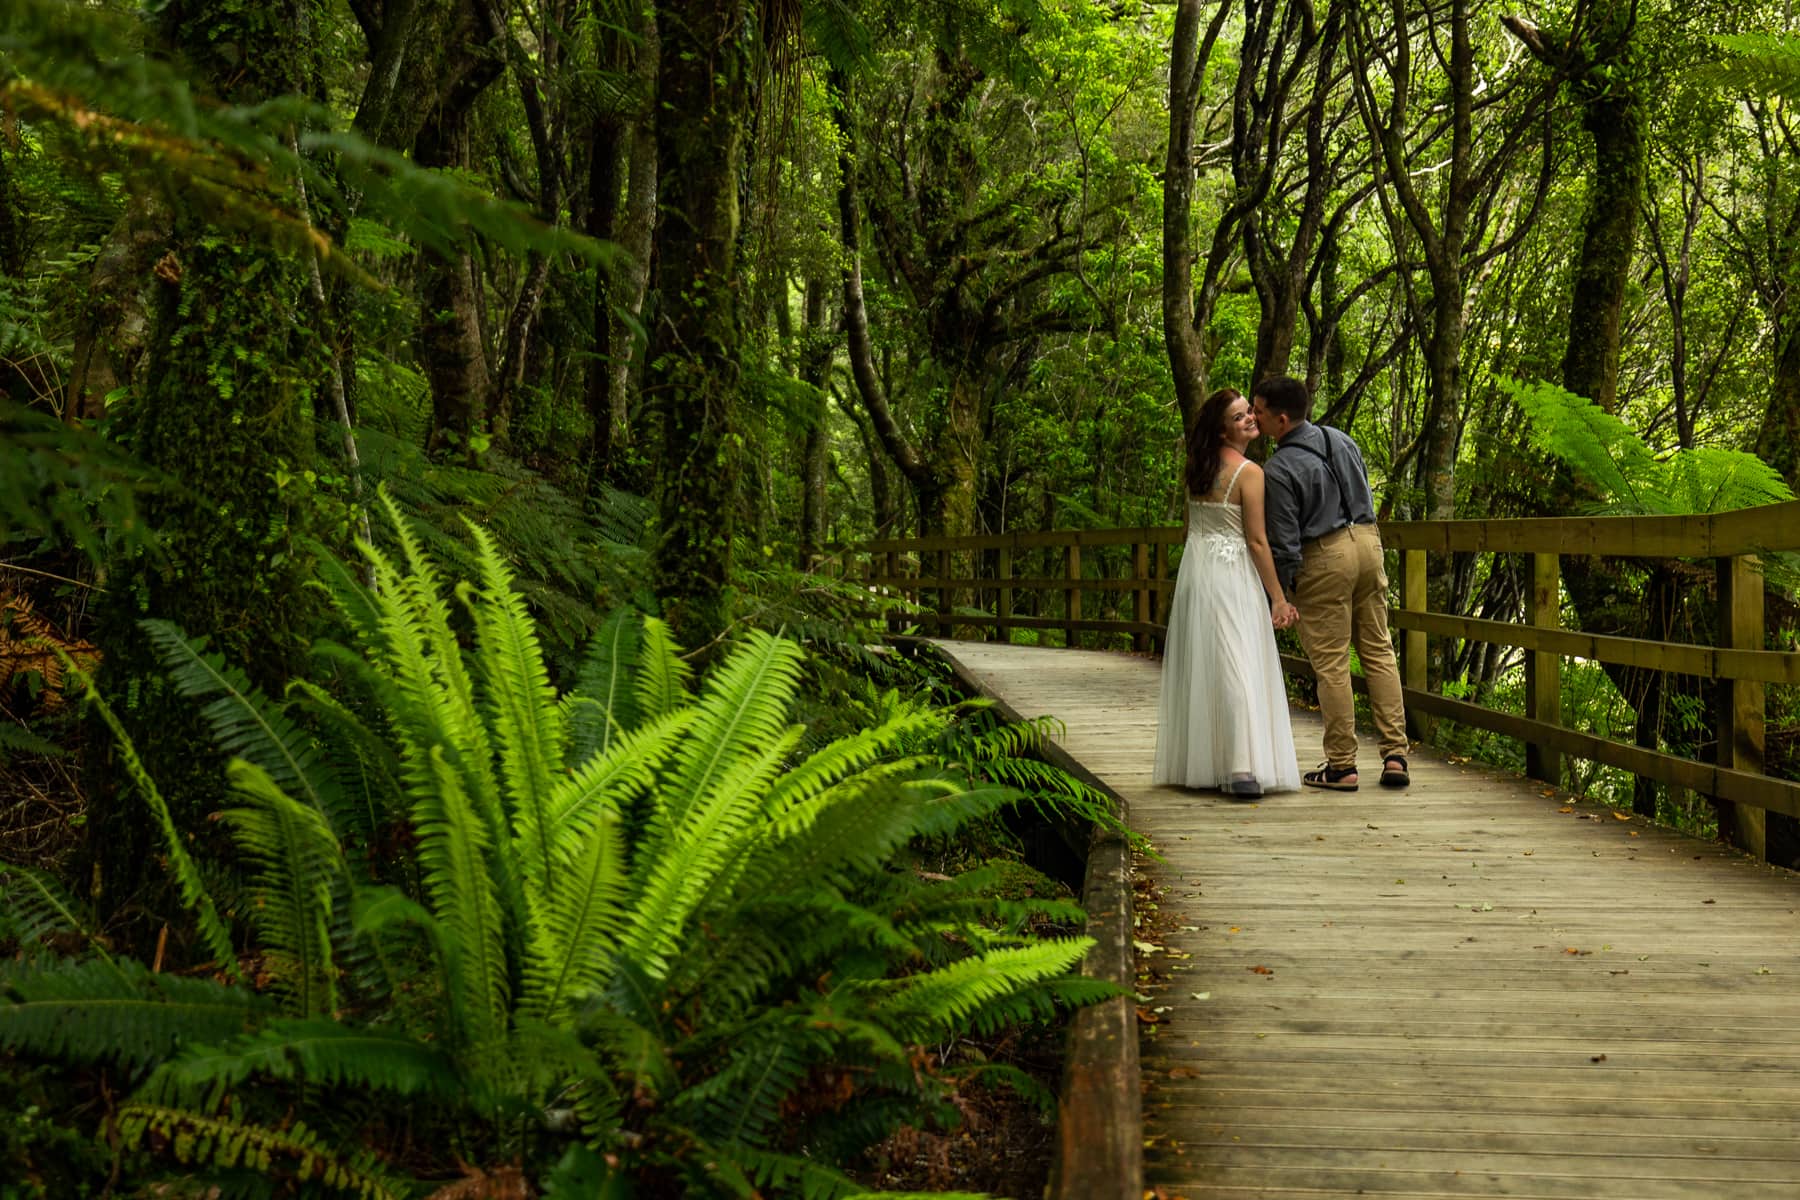 The groom kisses the bride's cheek in the fern jungle on a boardwalk on the south island of New Zealand.